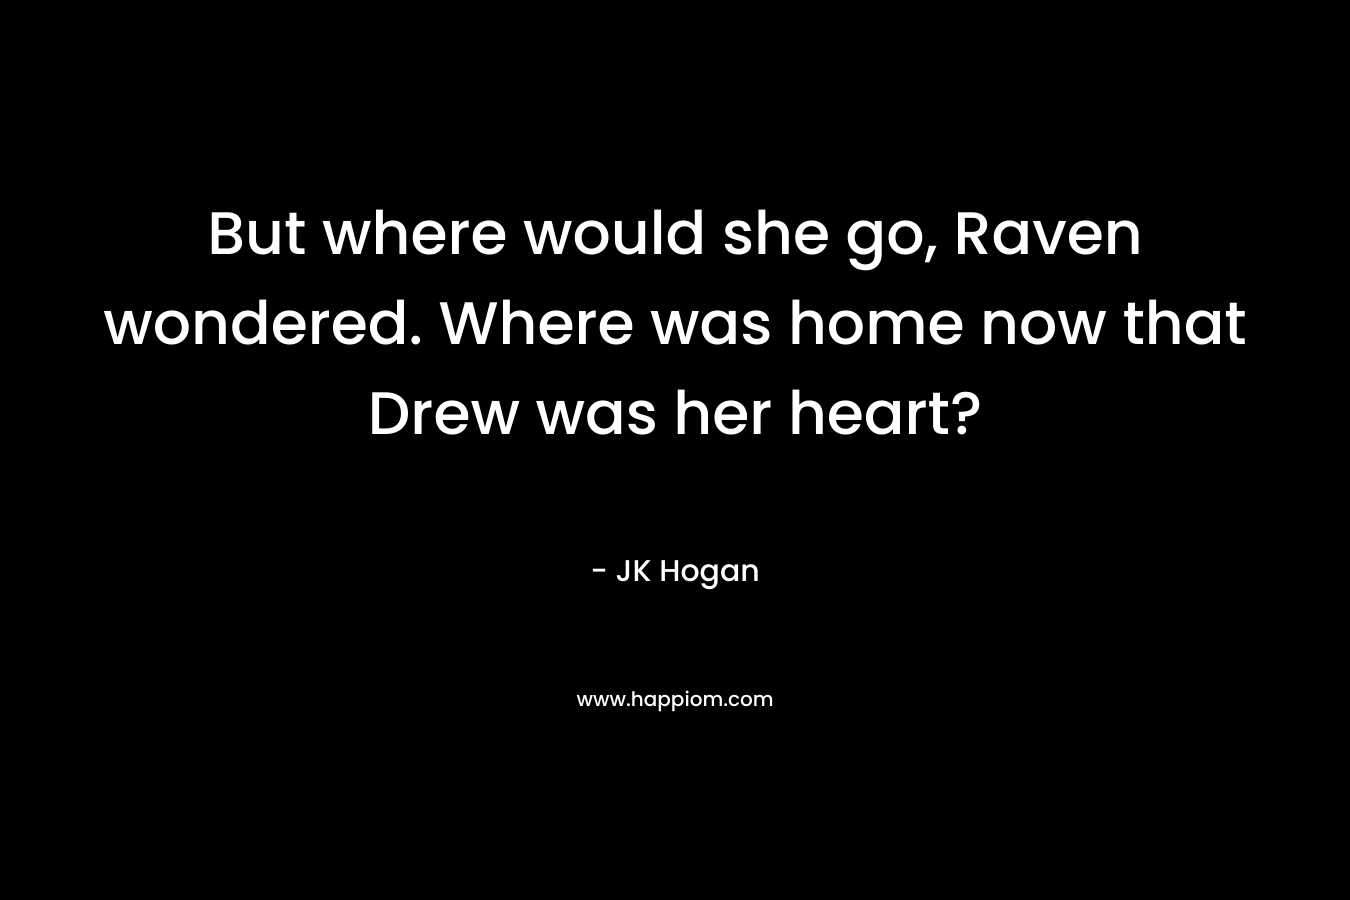 But where would she go, Raven wondered. Where was home now that Drew was her heart? – JK Hogan